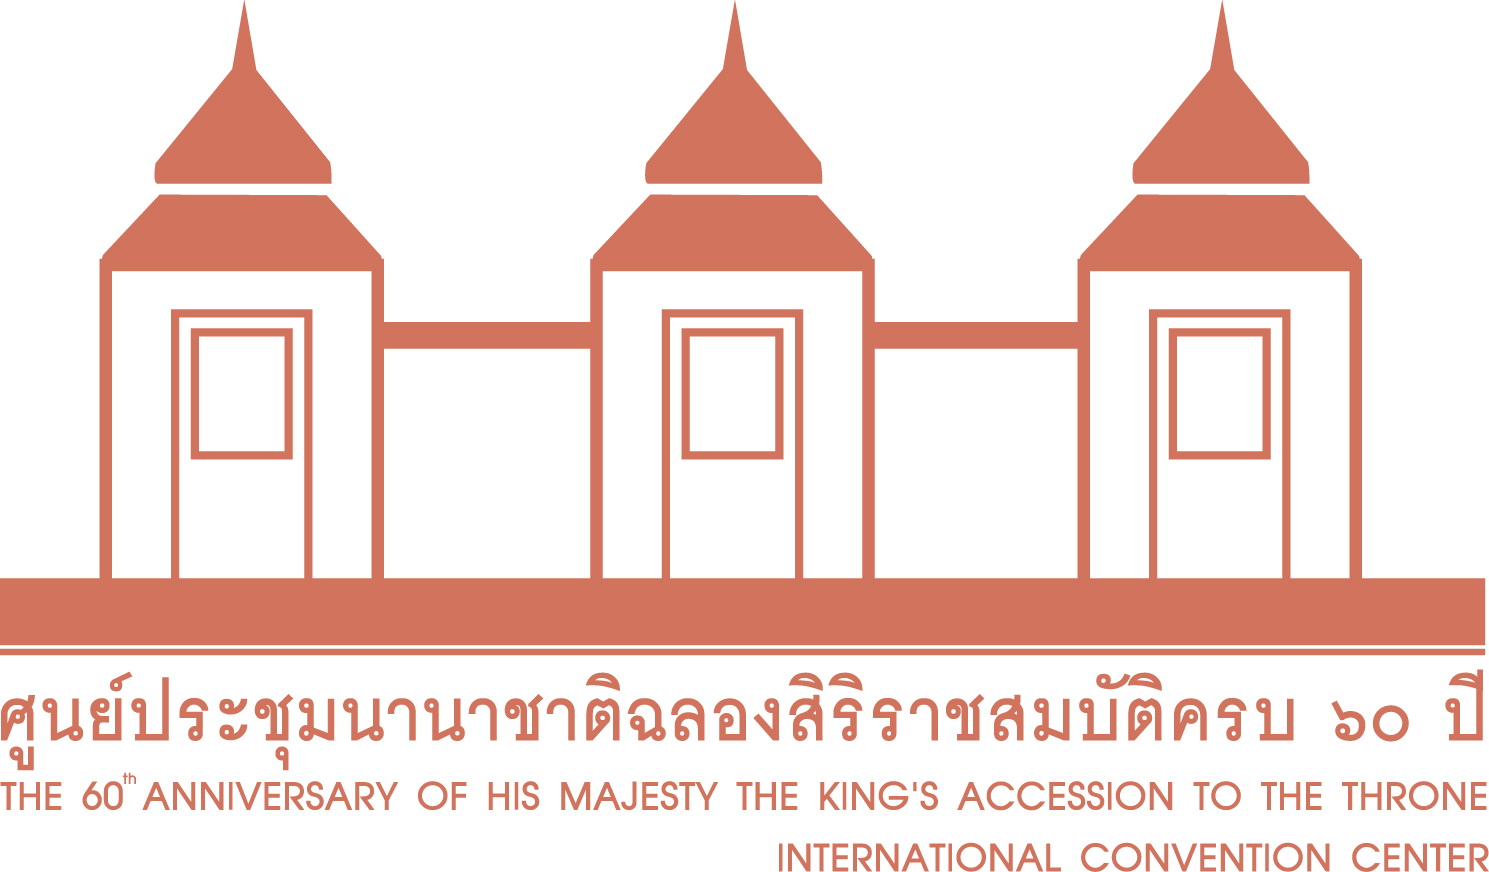 THE 60TH ANNIVERSARY OF HIS MAJESTY THE KING’S ACCESSION TO THE THRONE INTERNATIONAL CONVENTION CENTER 